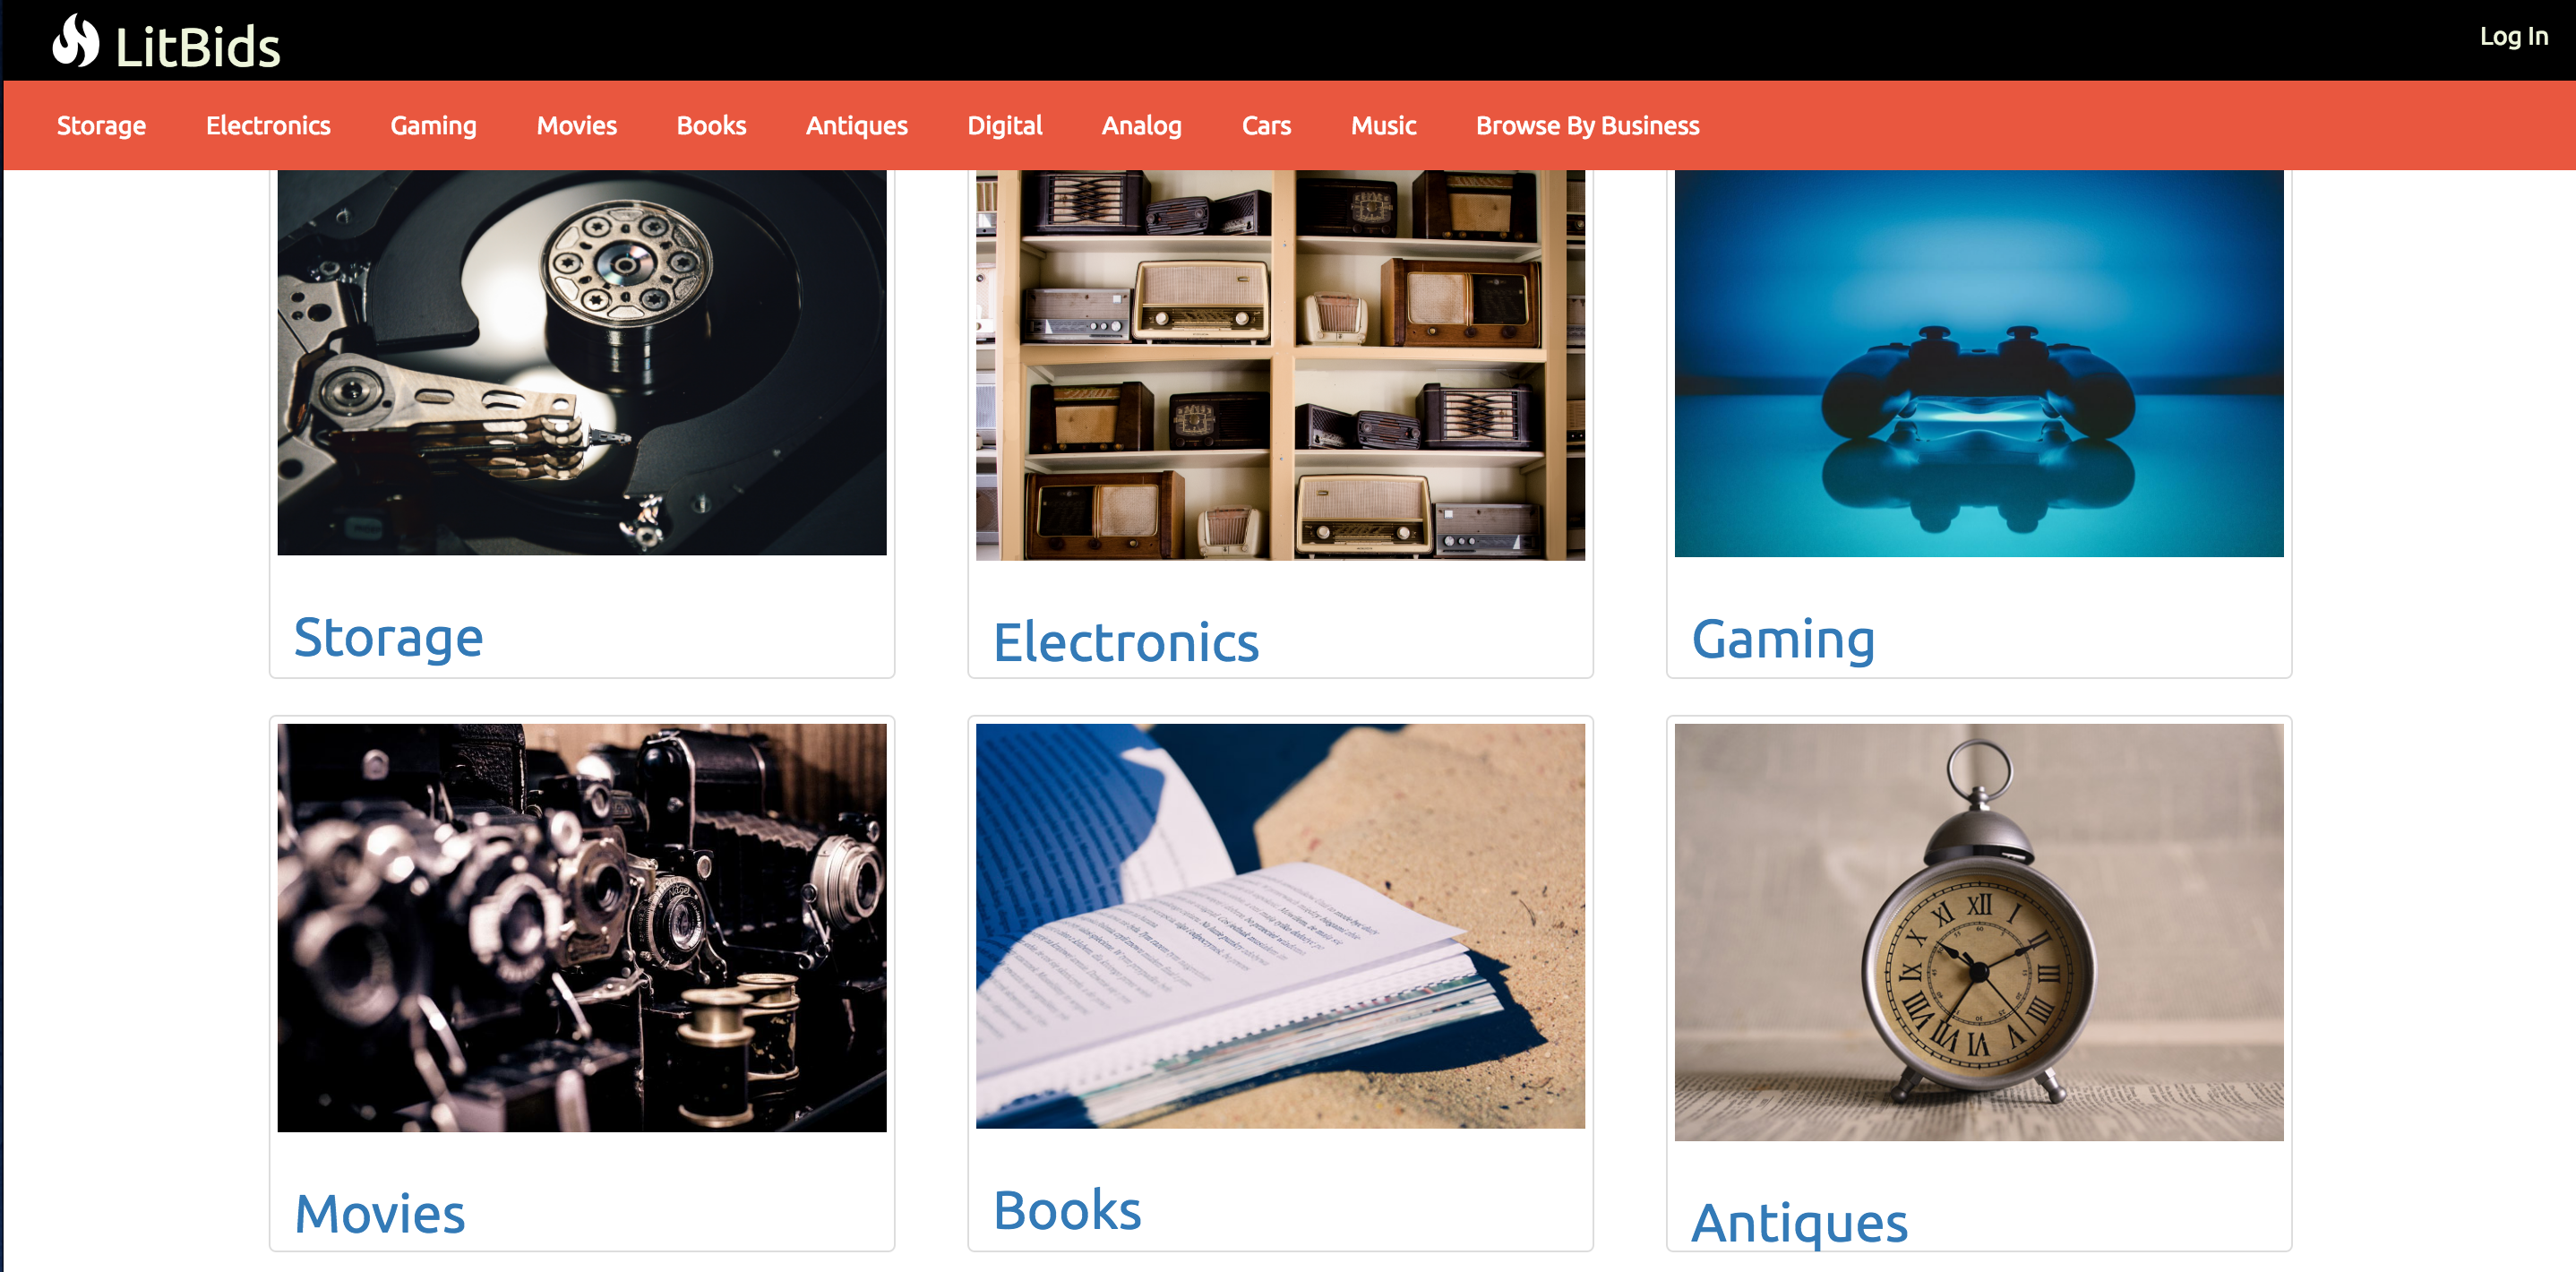 users browses items by category and business